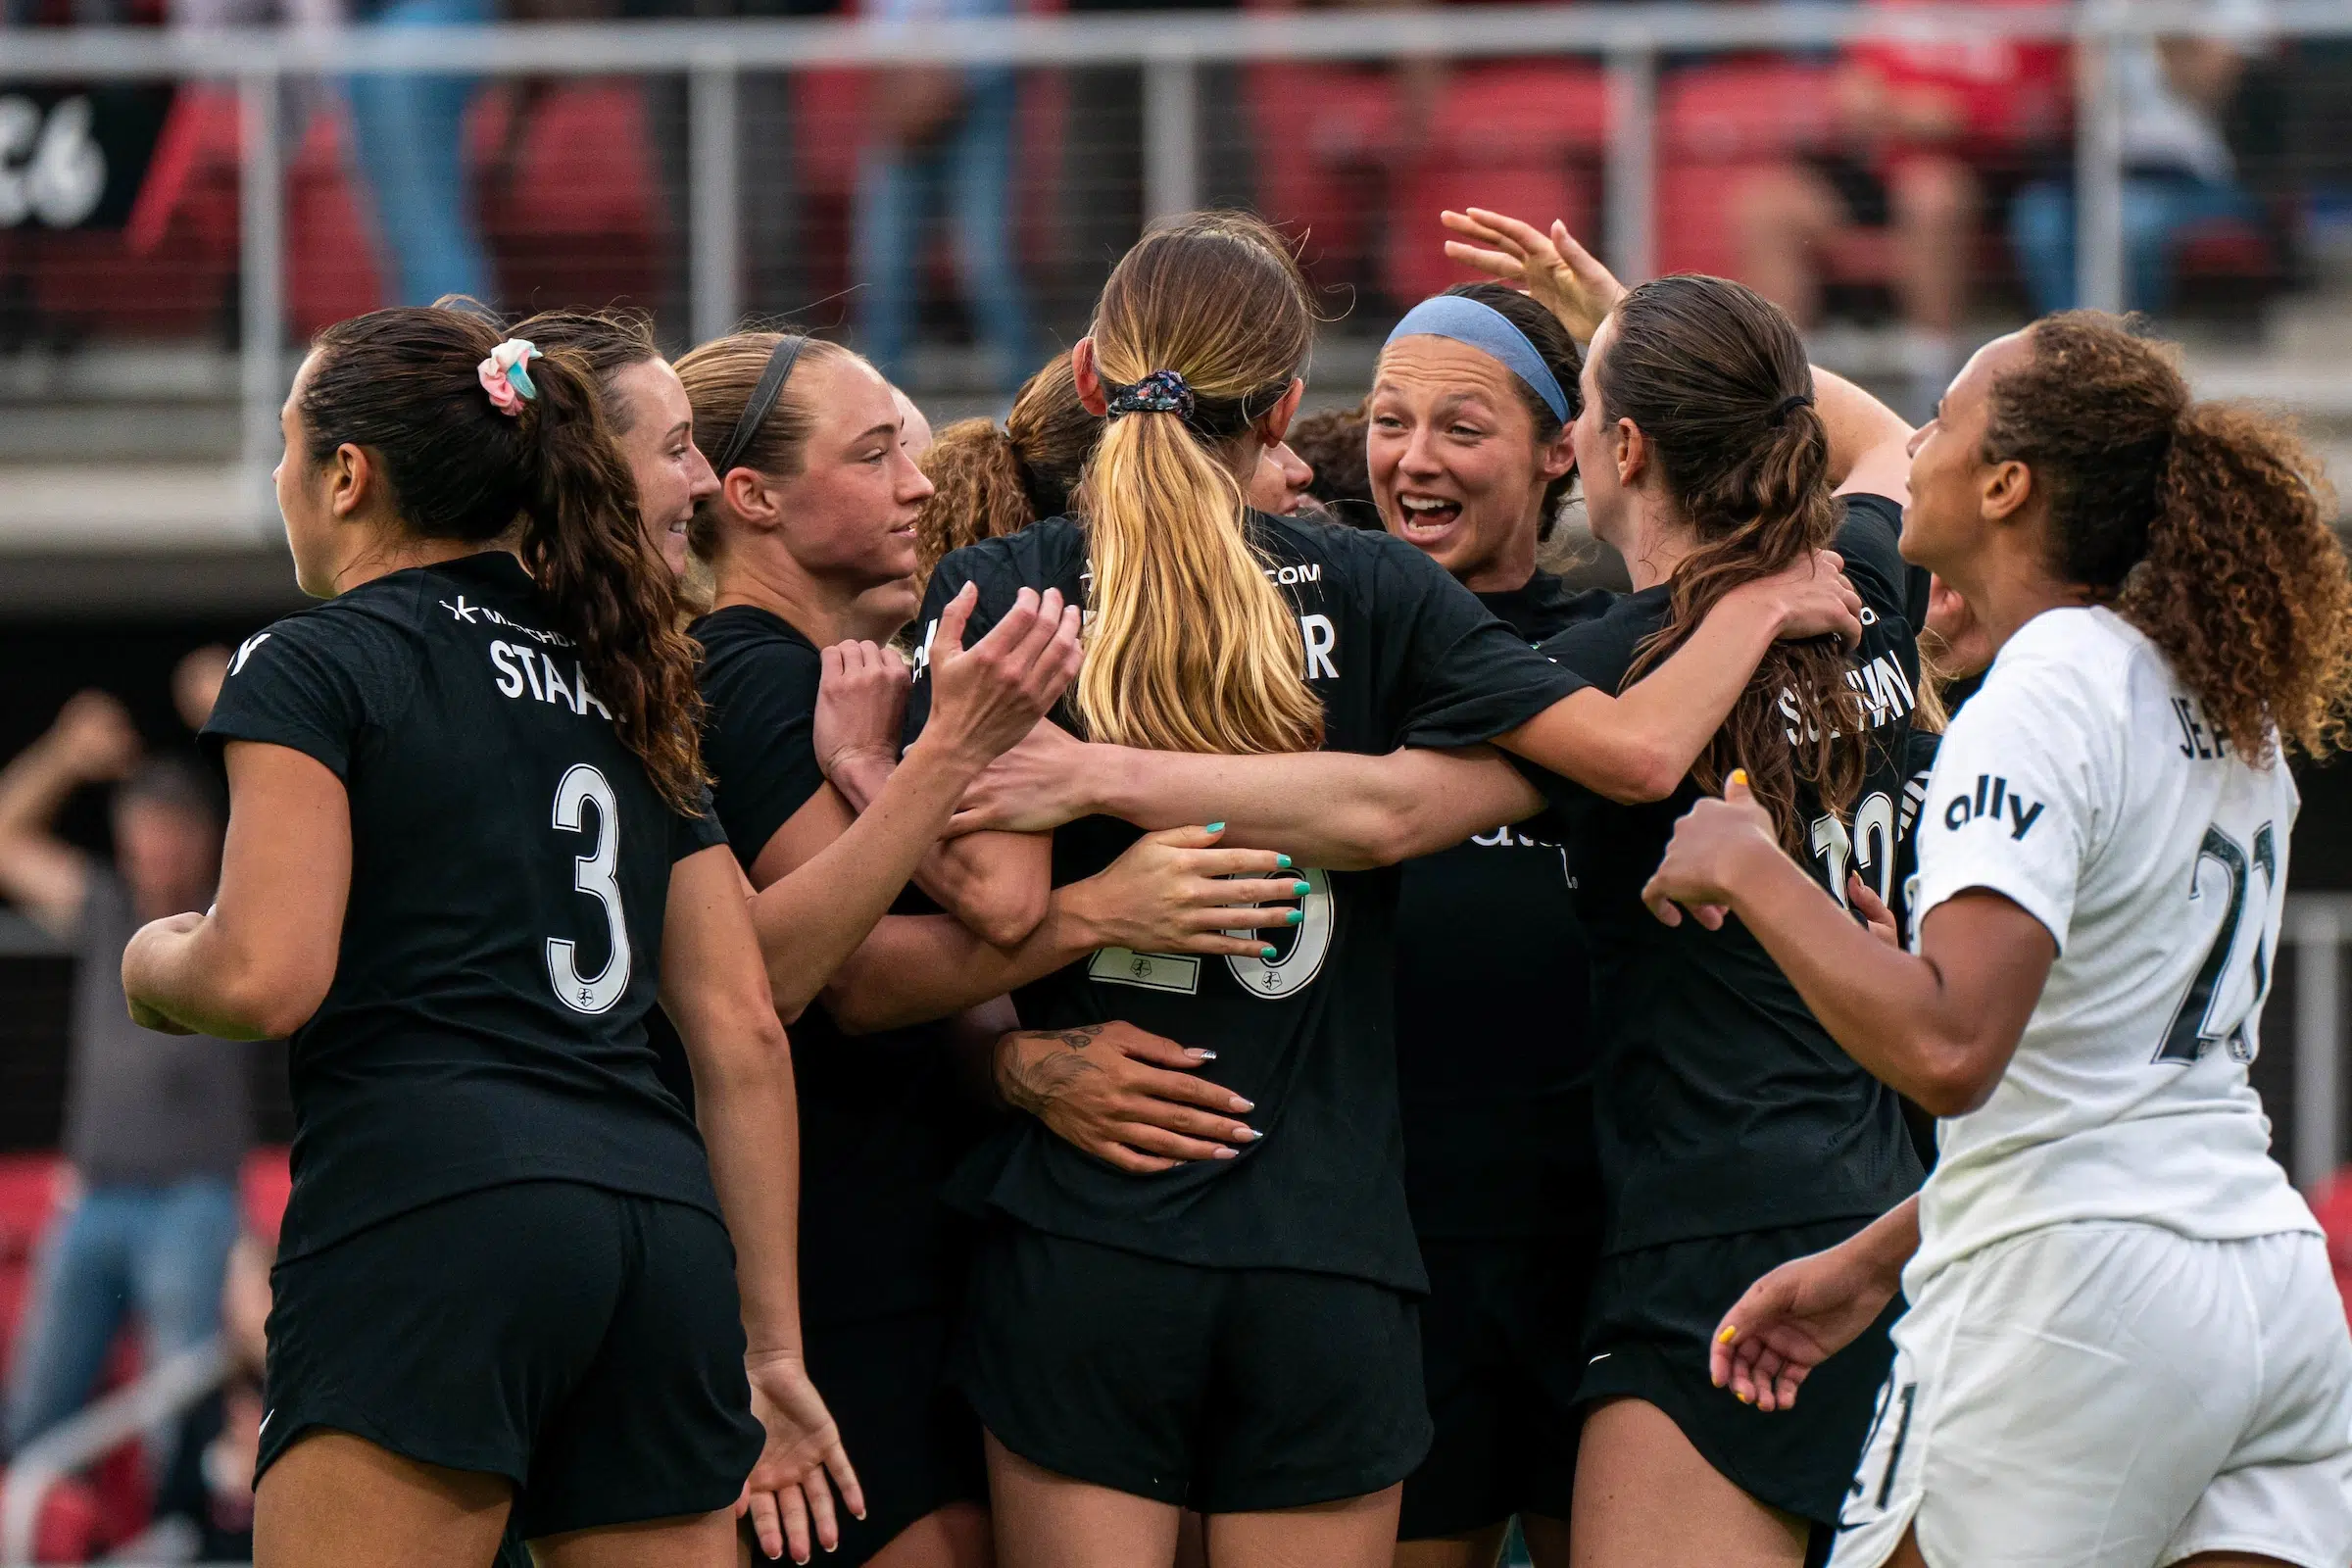 A team of soccer players in all black uniforms hug and celebrate after scoring a goal.